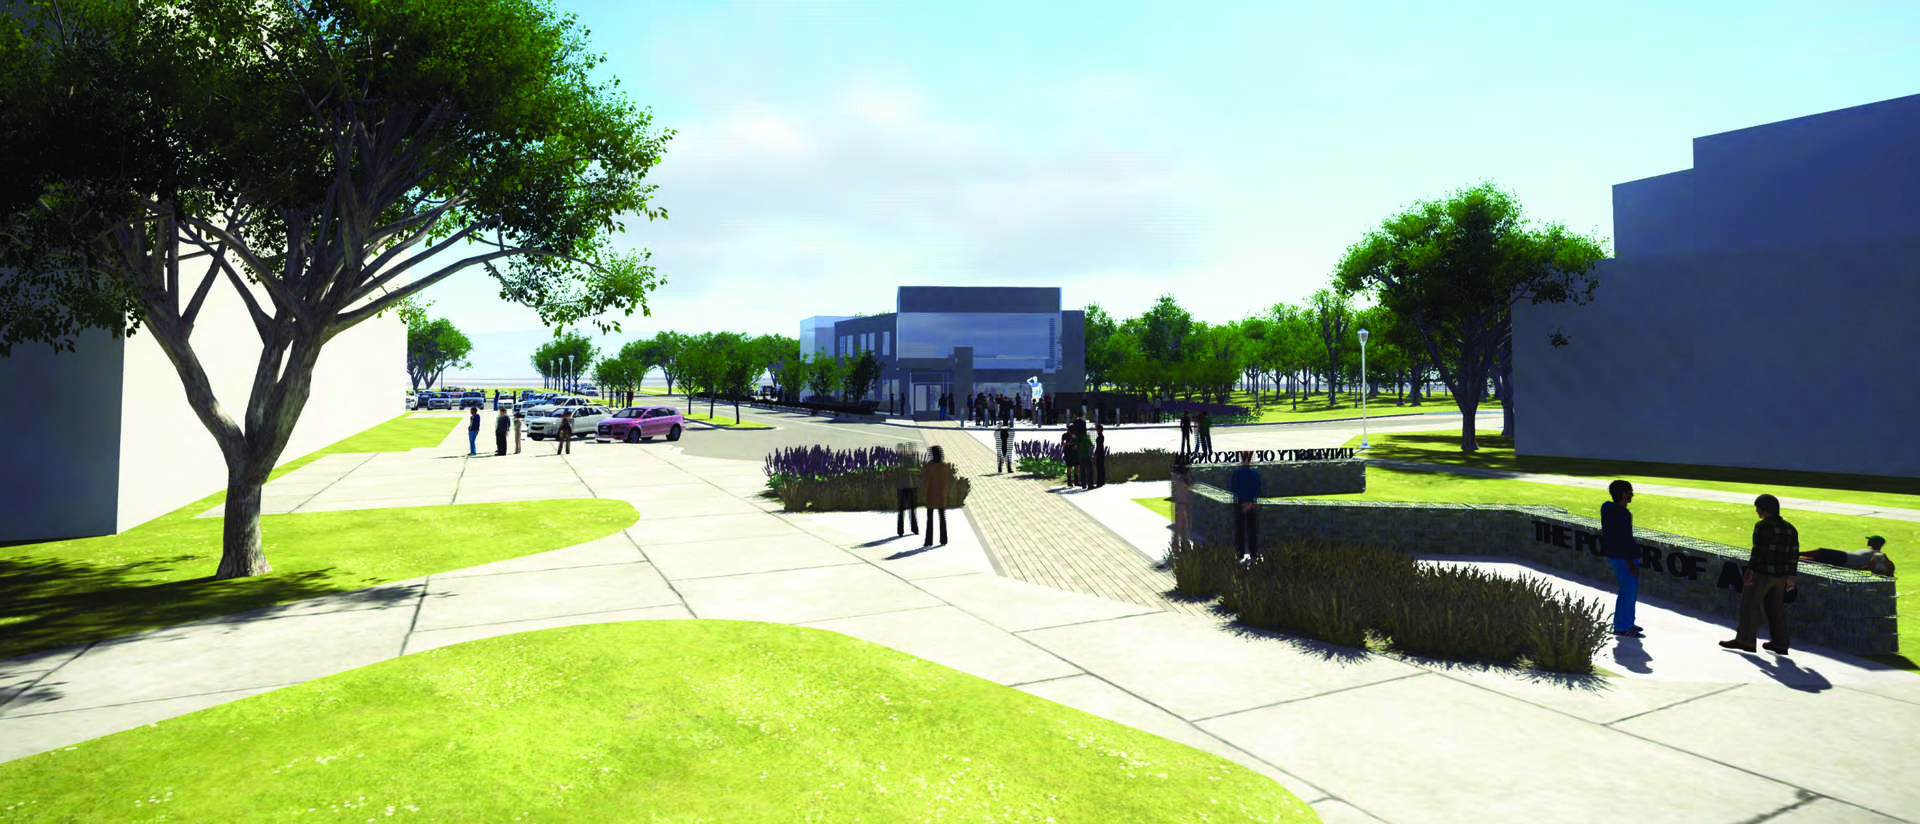 Visitor and Admissions Center rendering